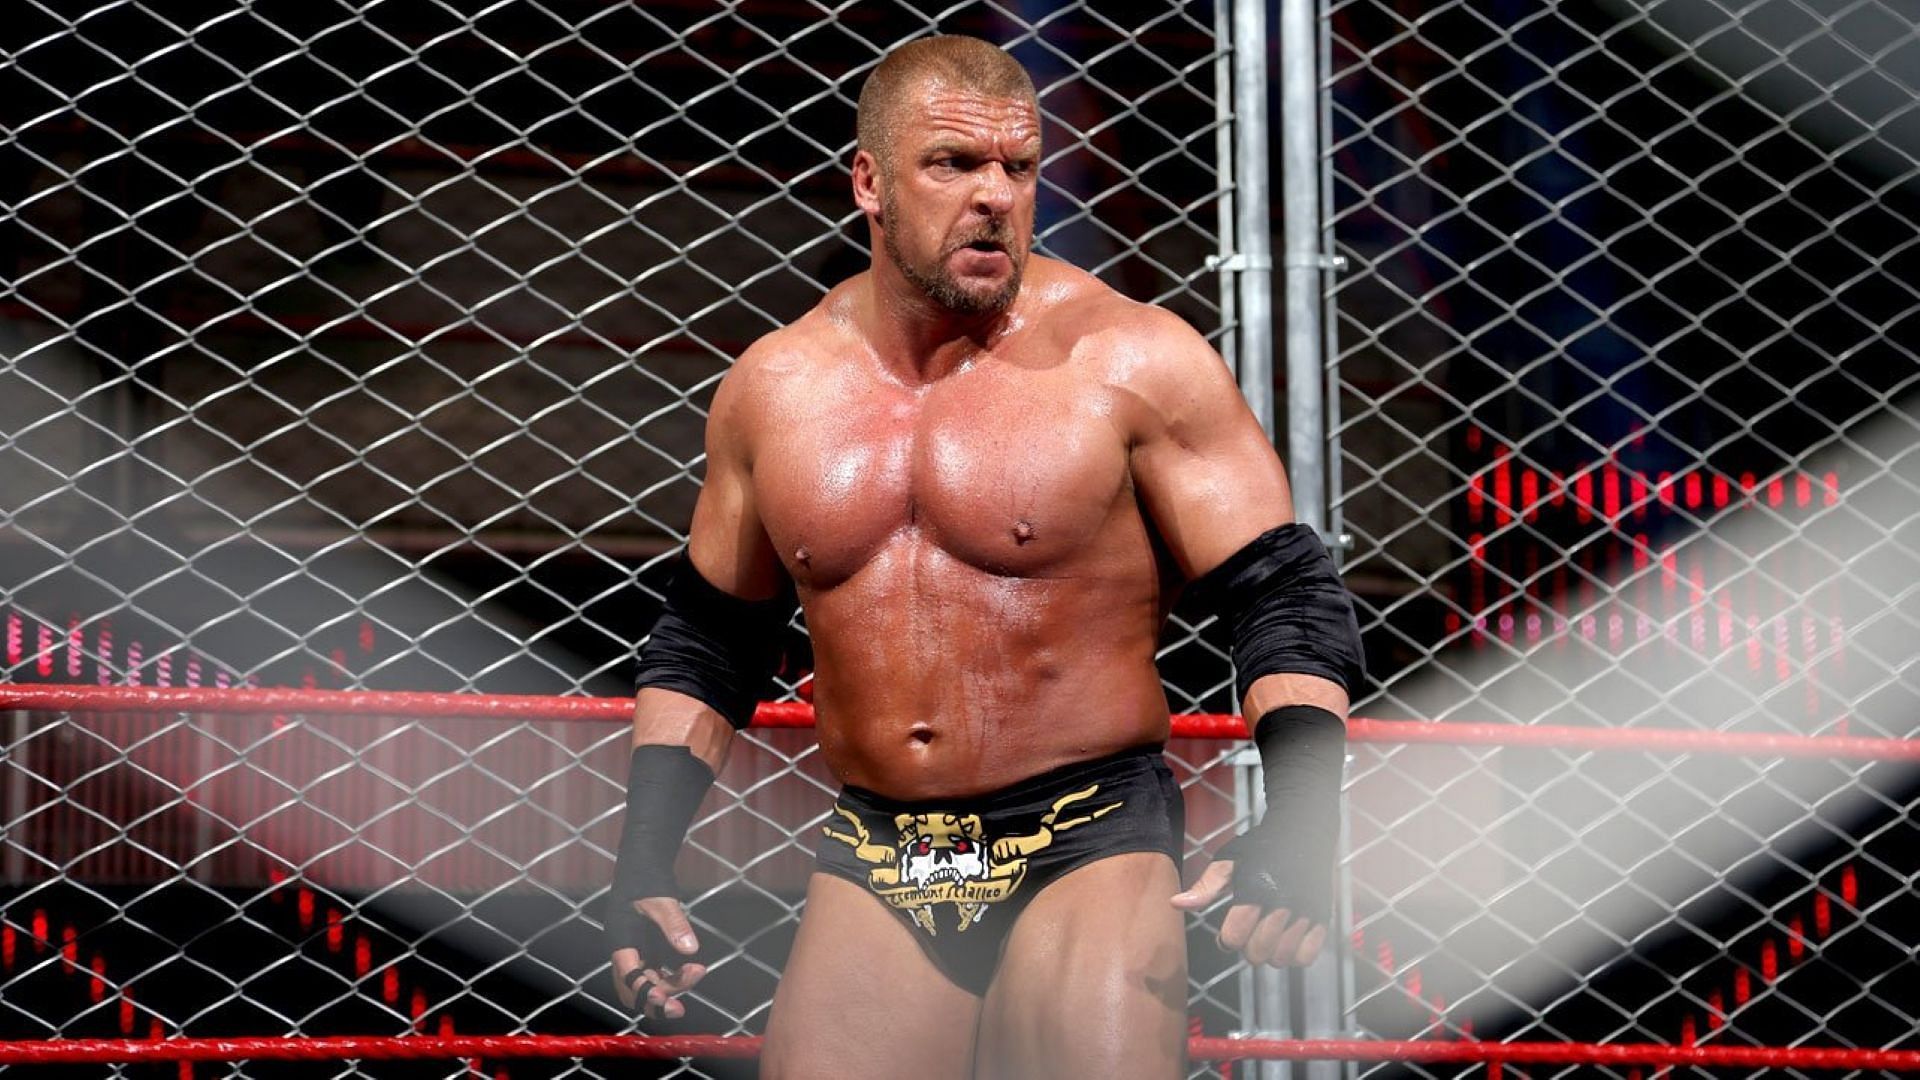 Triple H at Extreme Rules